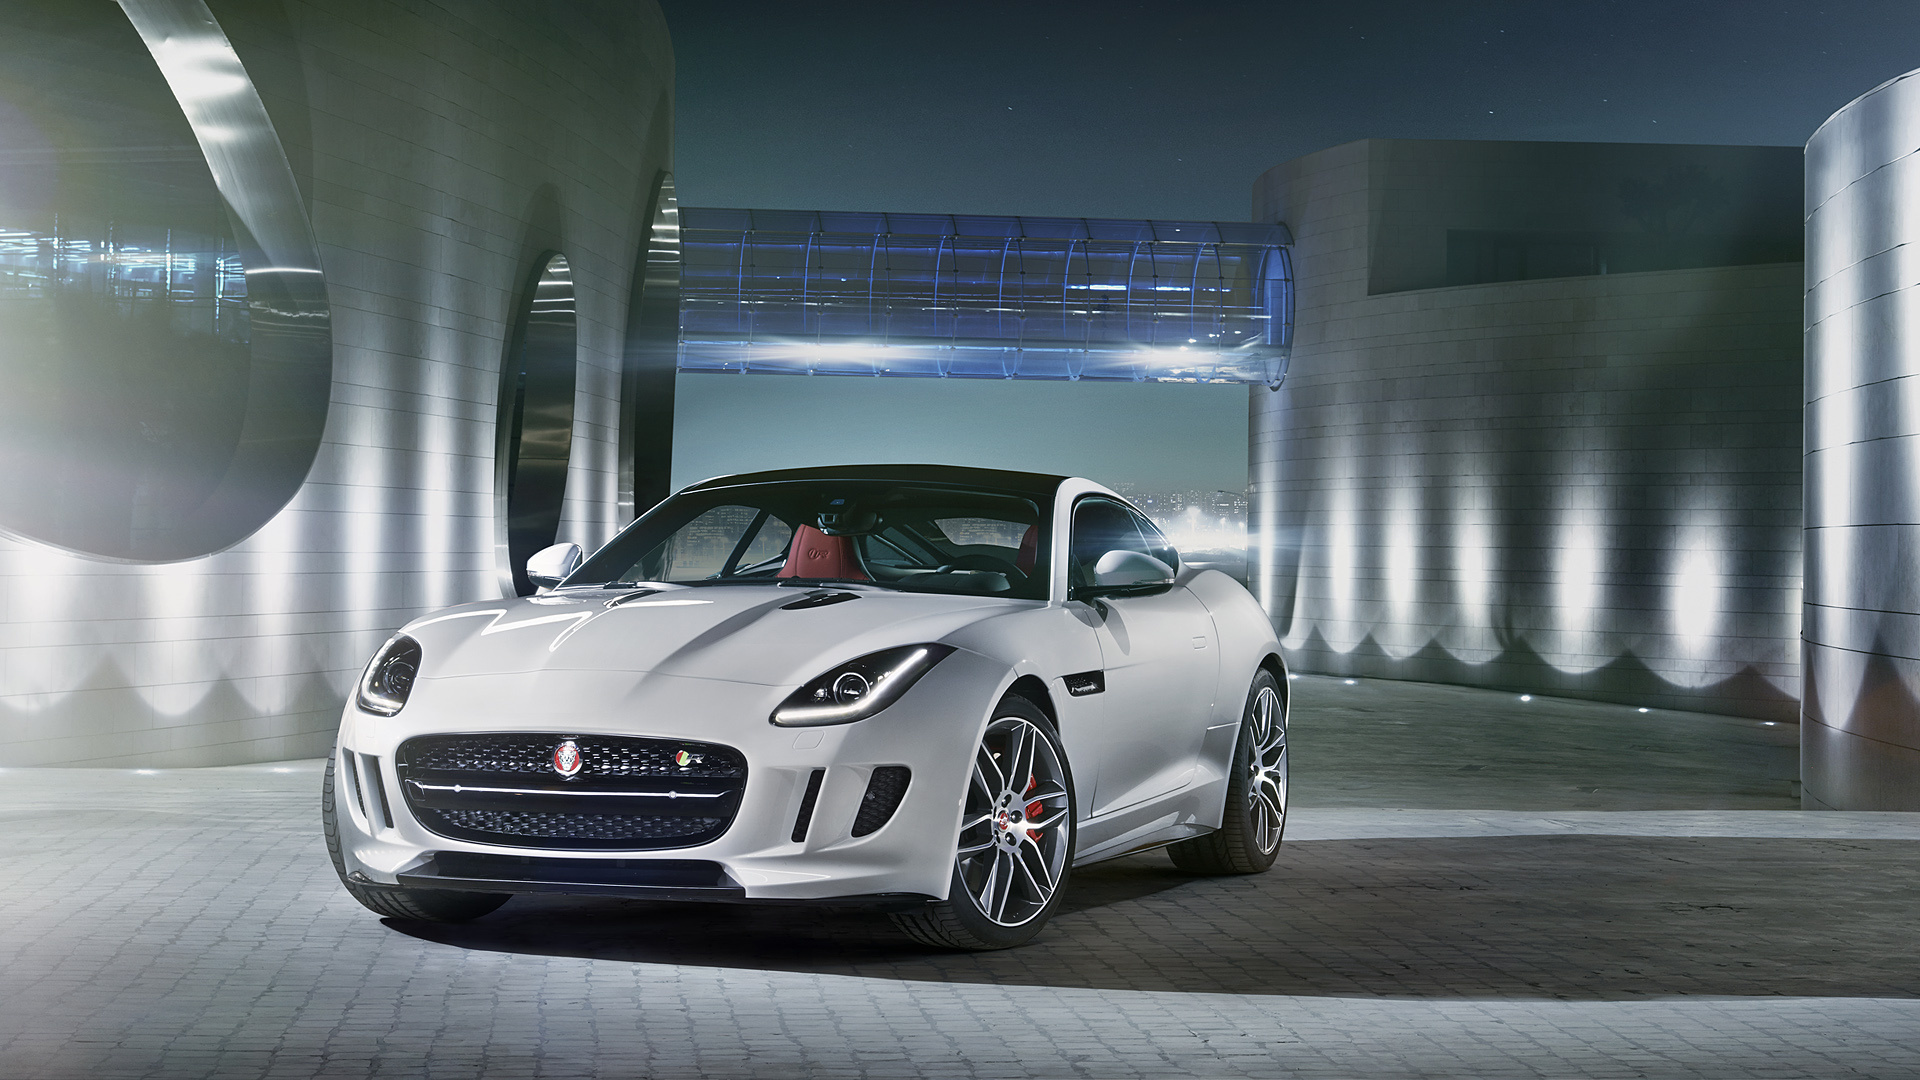 Jaguar F-TYPE, HD wallpapers, Download images, High-performance coupe, 1920x1080 Full HD Desktop